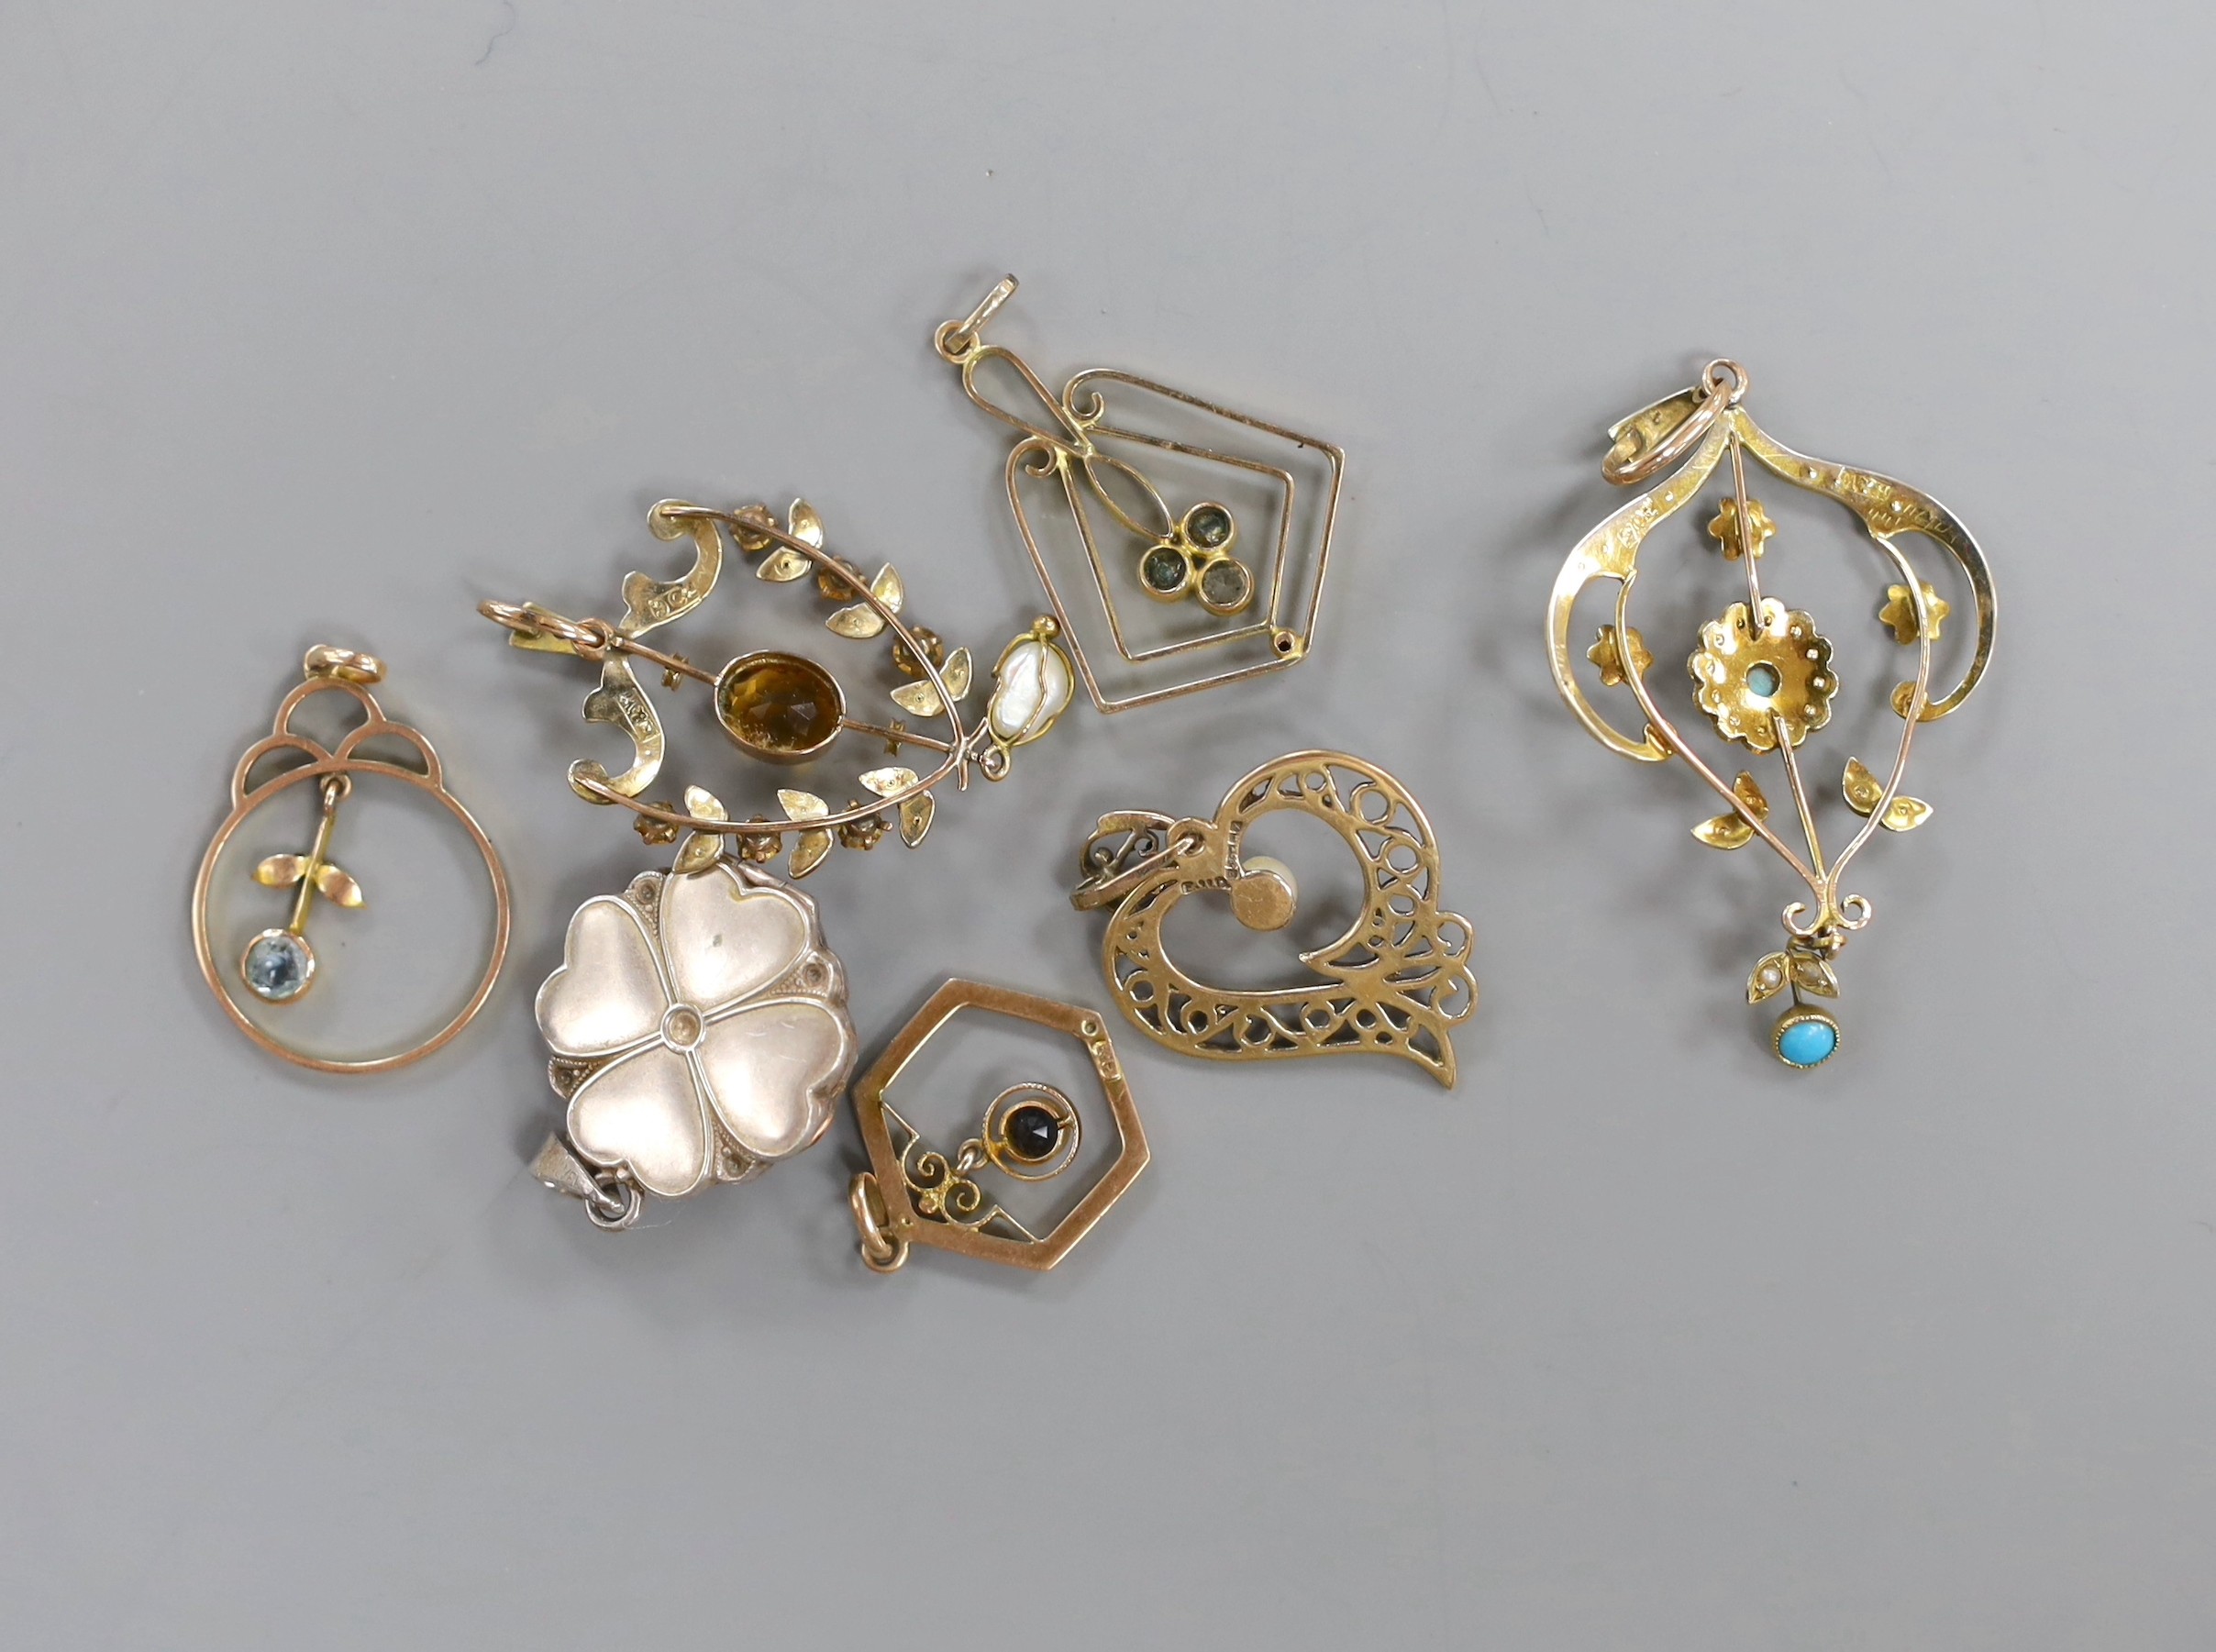 Seven assorted mainly early 20th century pendants, including 9ct, seed pearl and turquoise, white metal, marcasite and mother of pearl and a 9ct citrine and seed pearl.